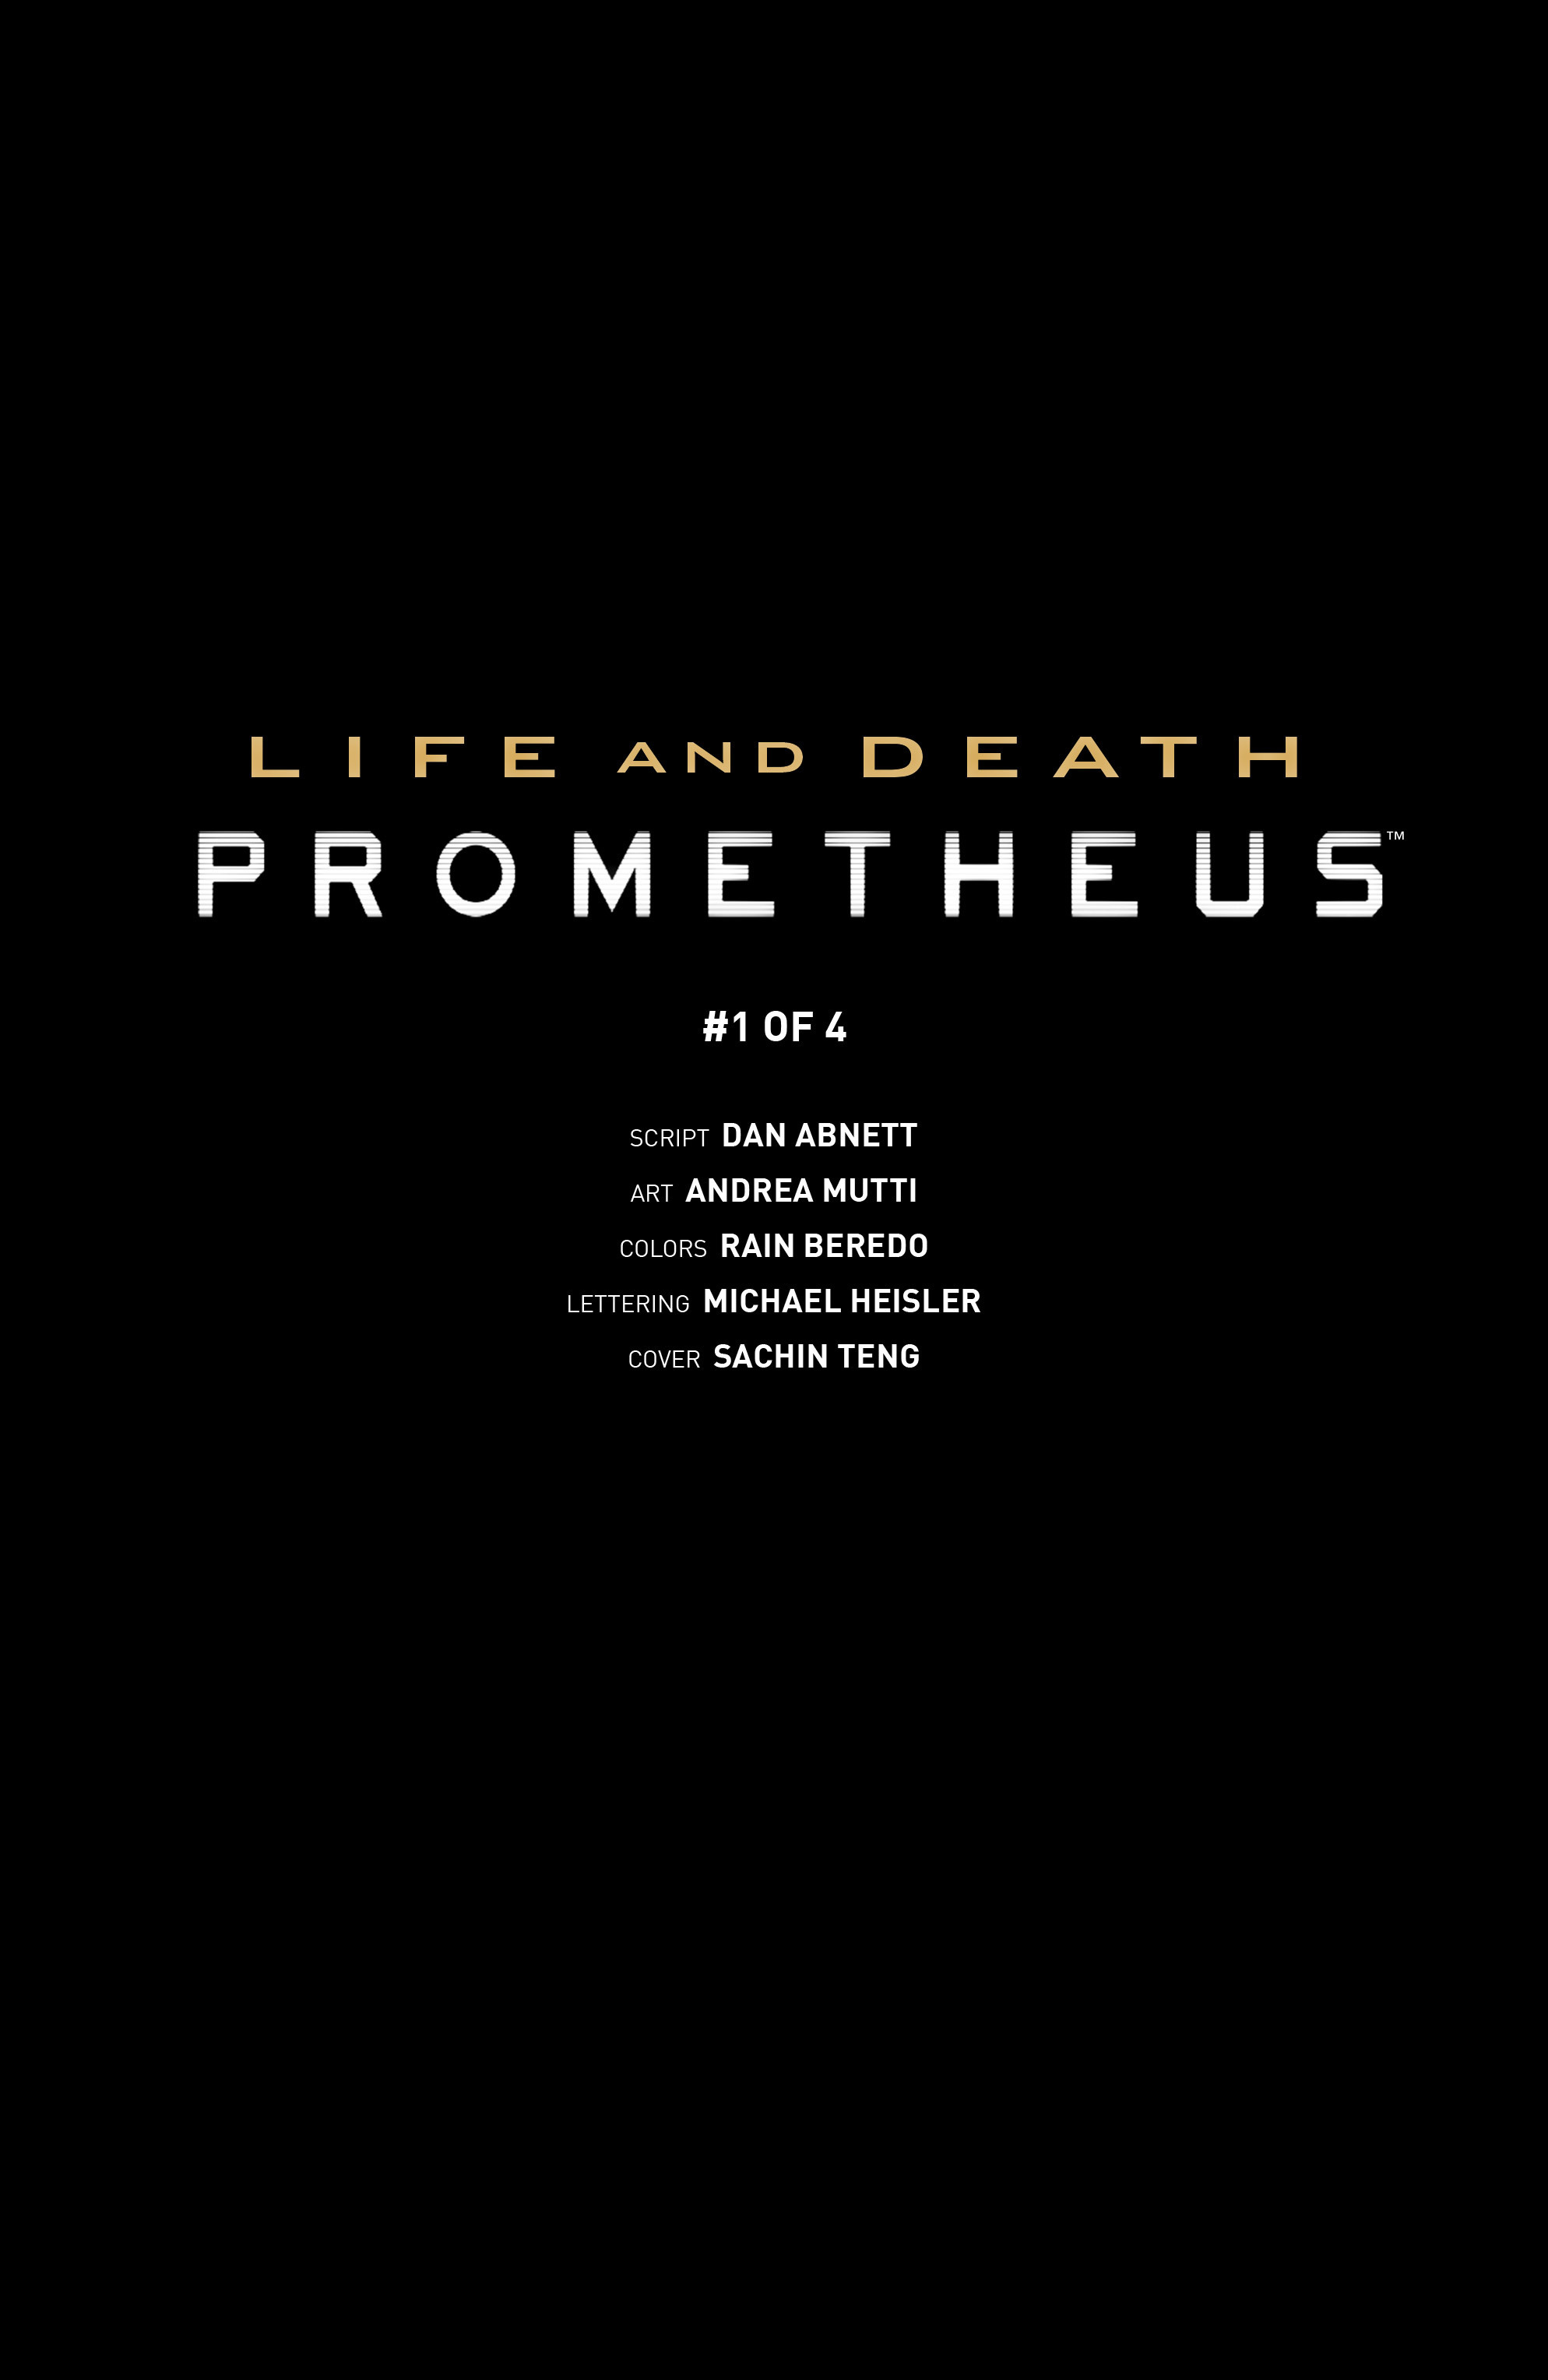 Read online Prometheus: Life and Death comic -  Issue #1 - 28